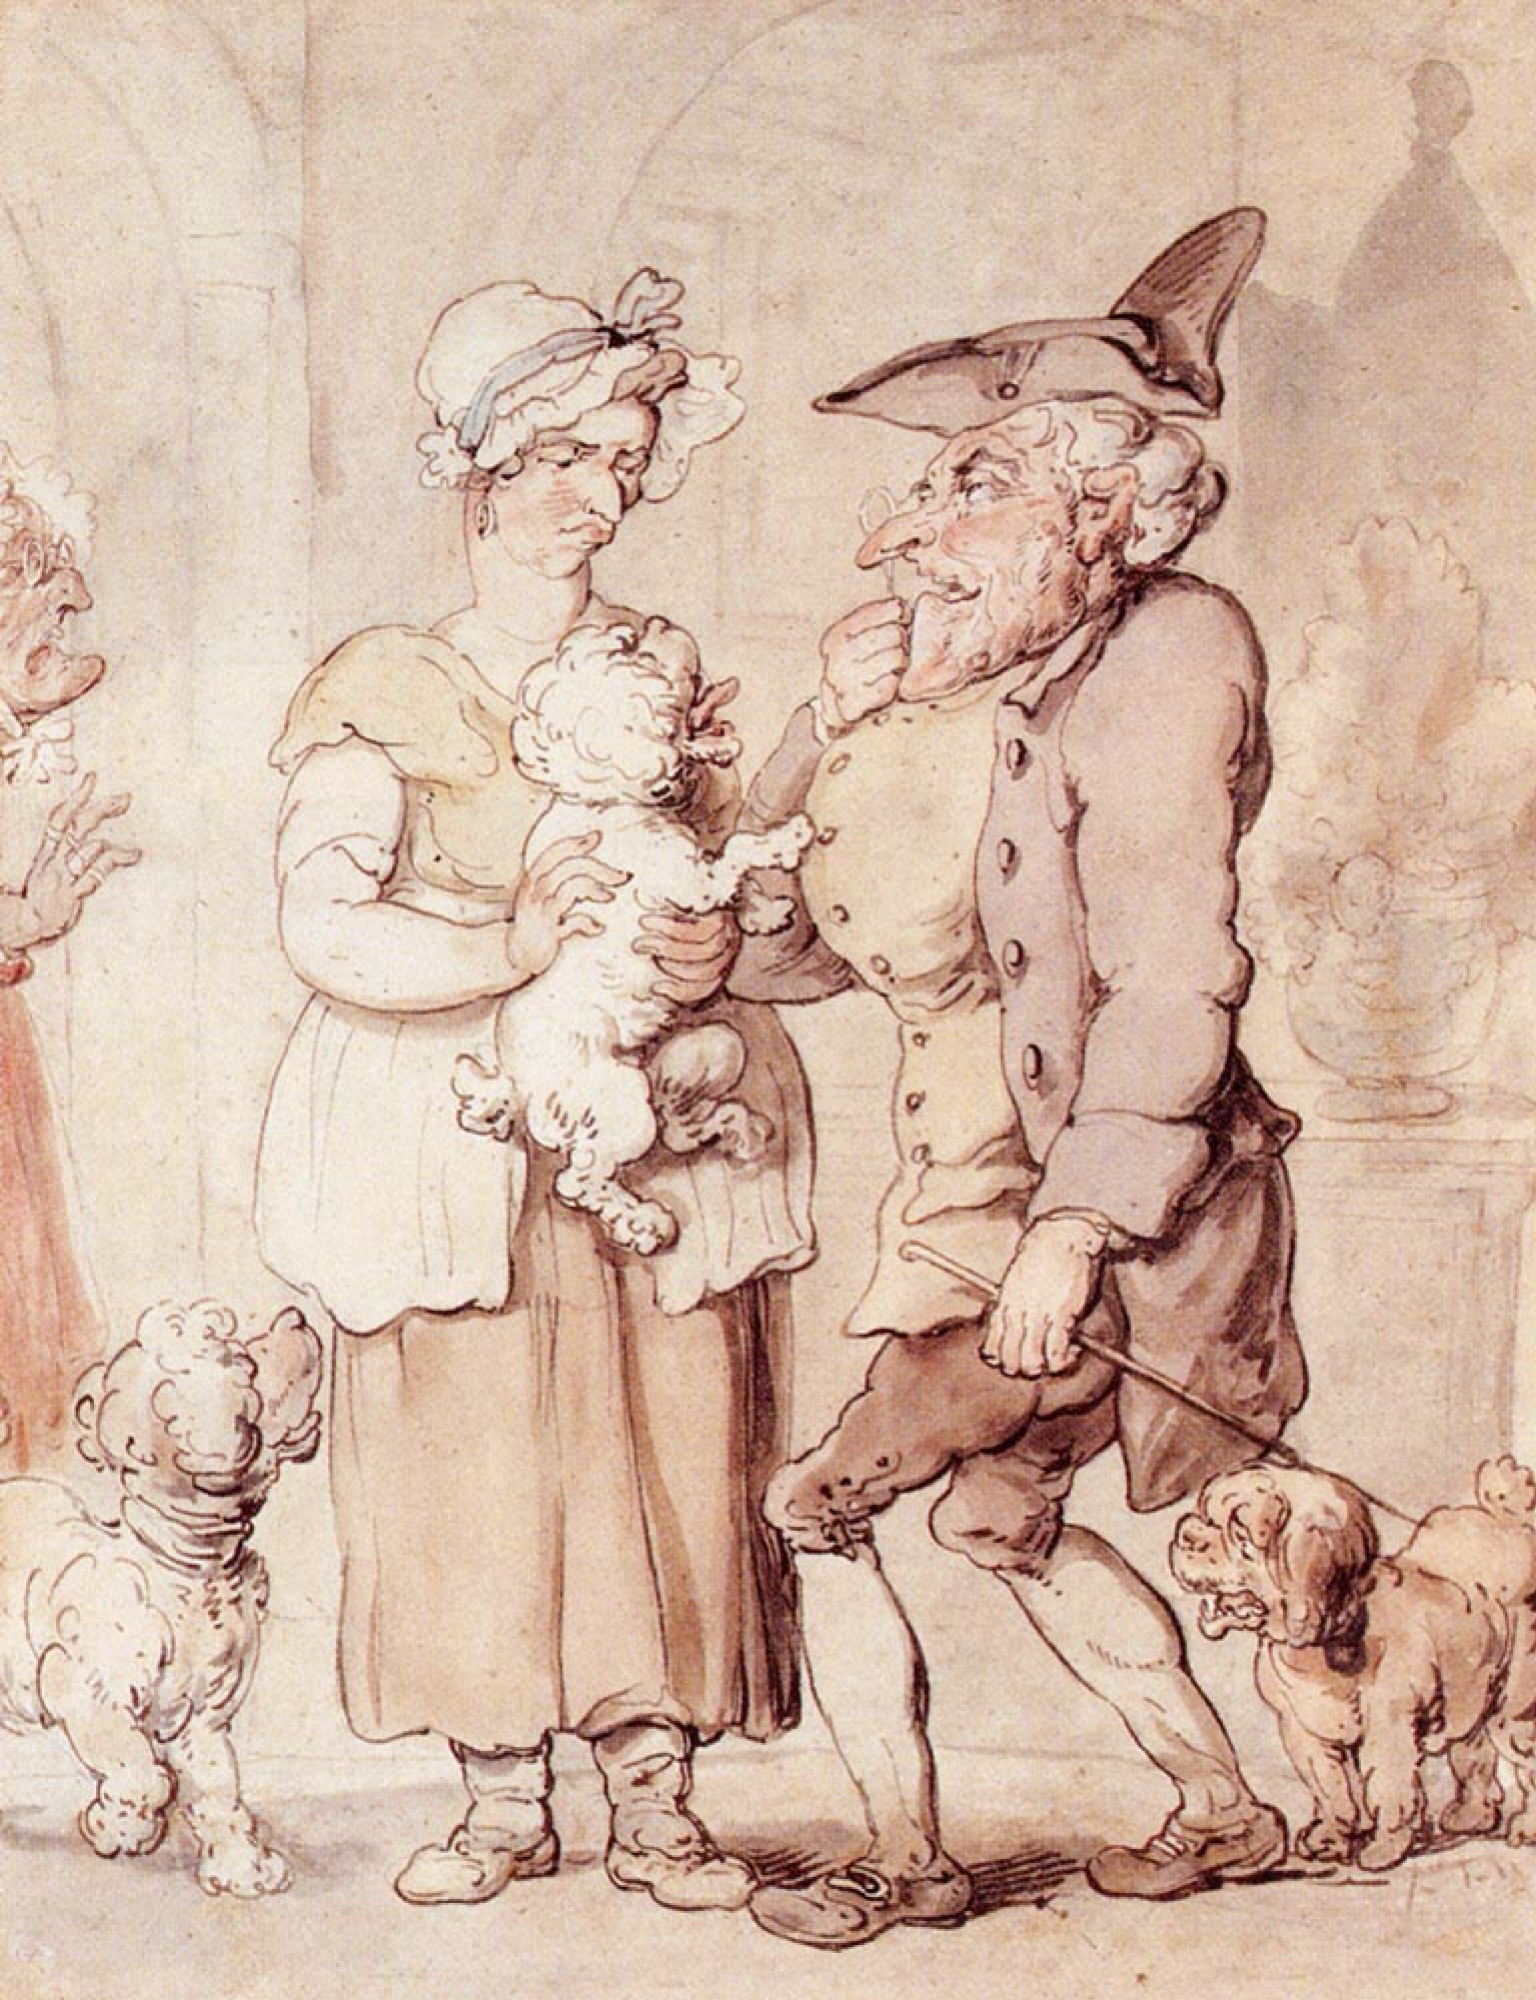 A sick dog by Thomas Rowlandson: History, Analysis & Facts | Arthive